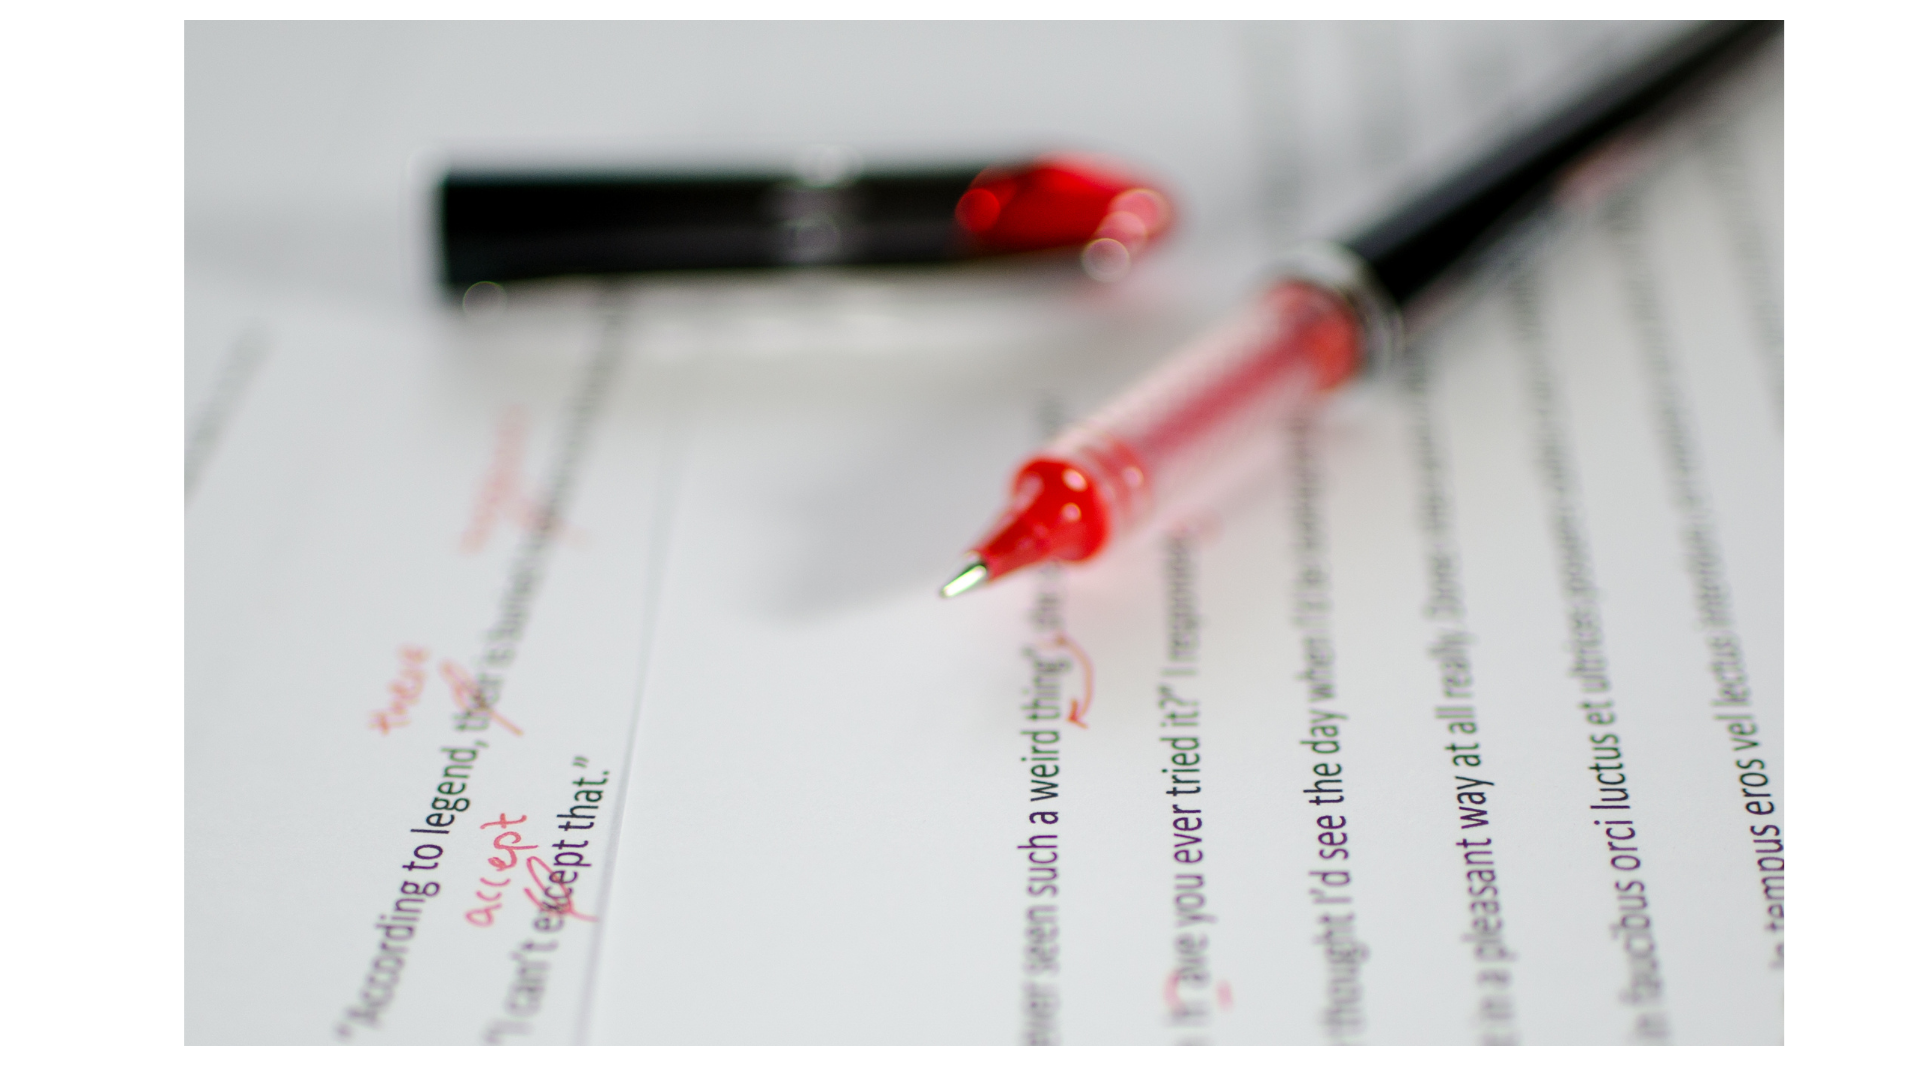 A red pen marking up/editing a paper.